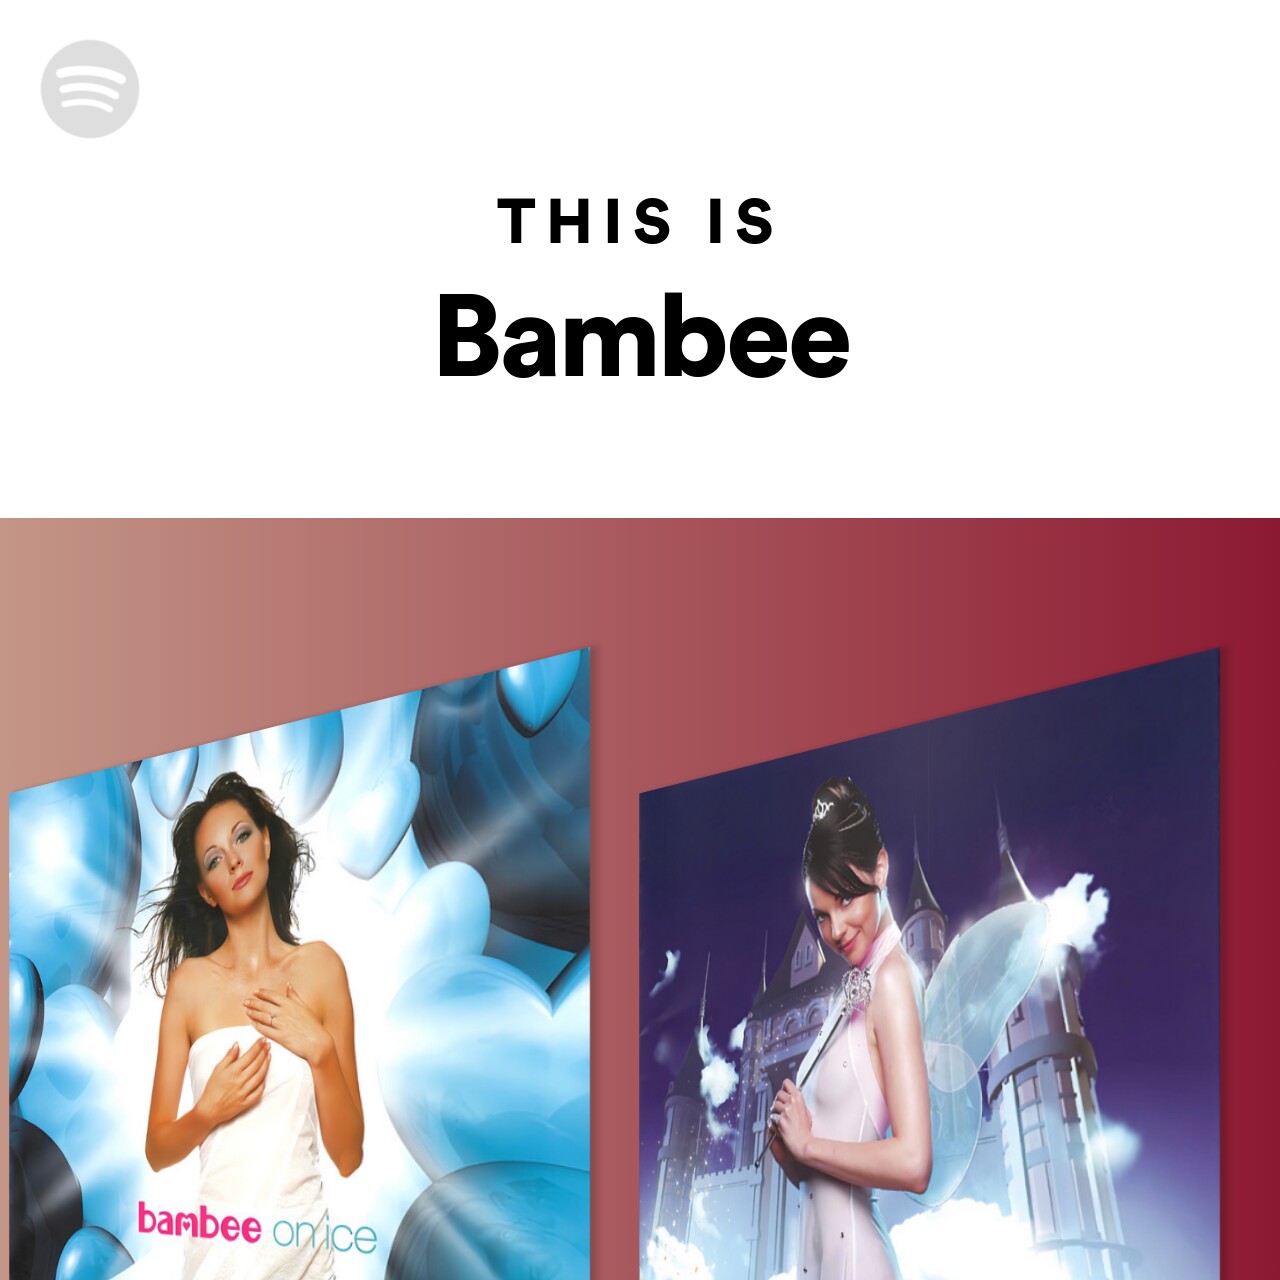 This Is Bambee